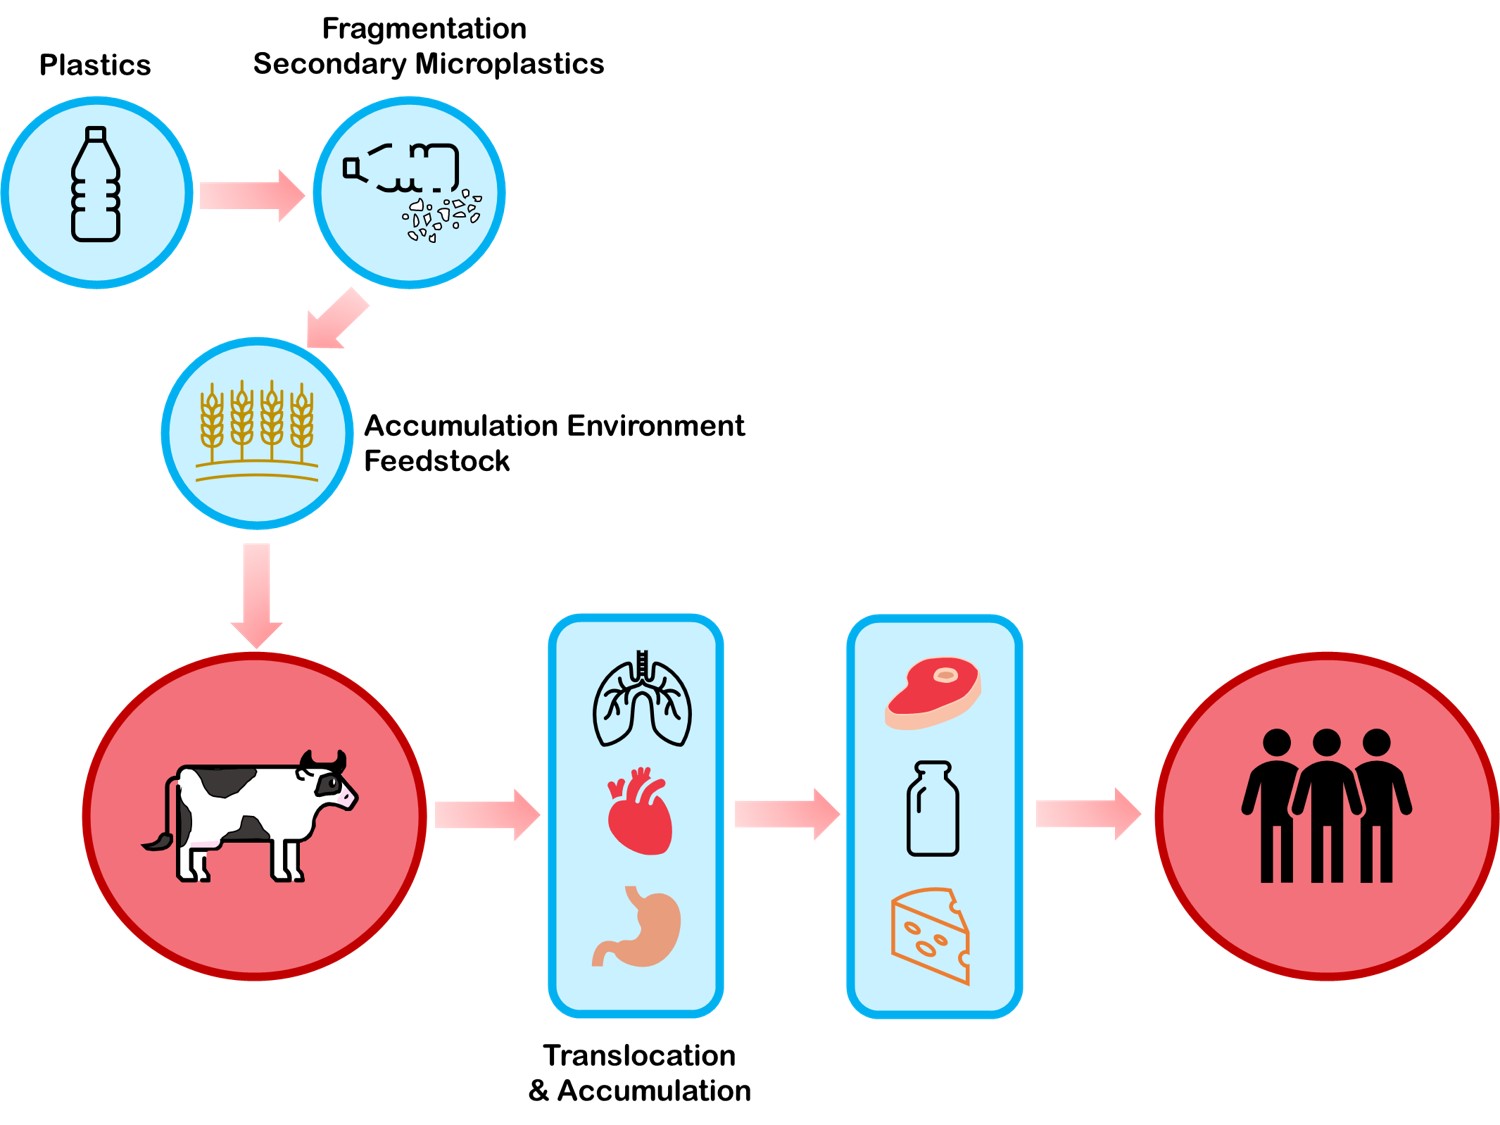 Uptake and transfer of microplastics from farmed animal products. © Wasser  3.0.